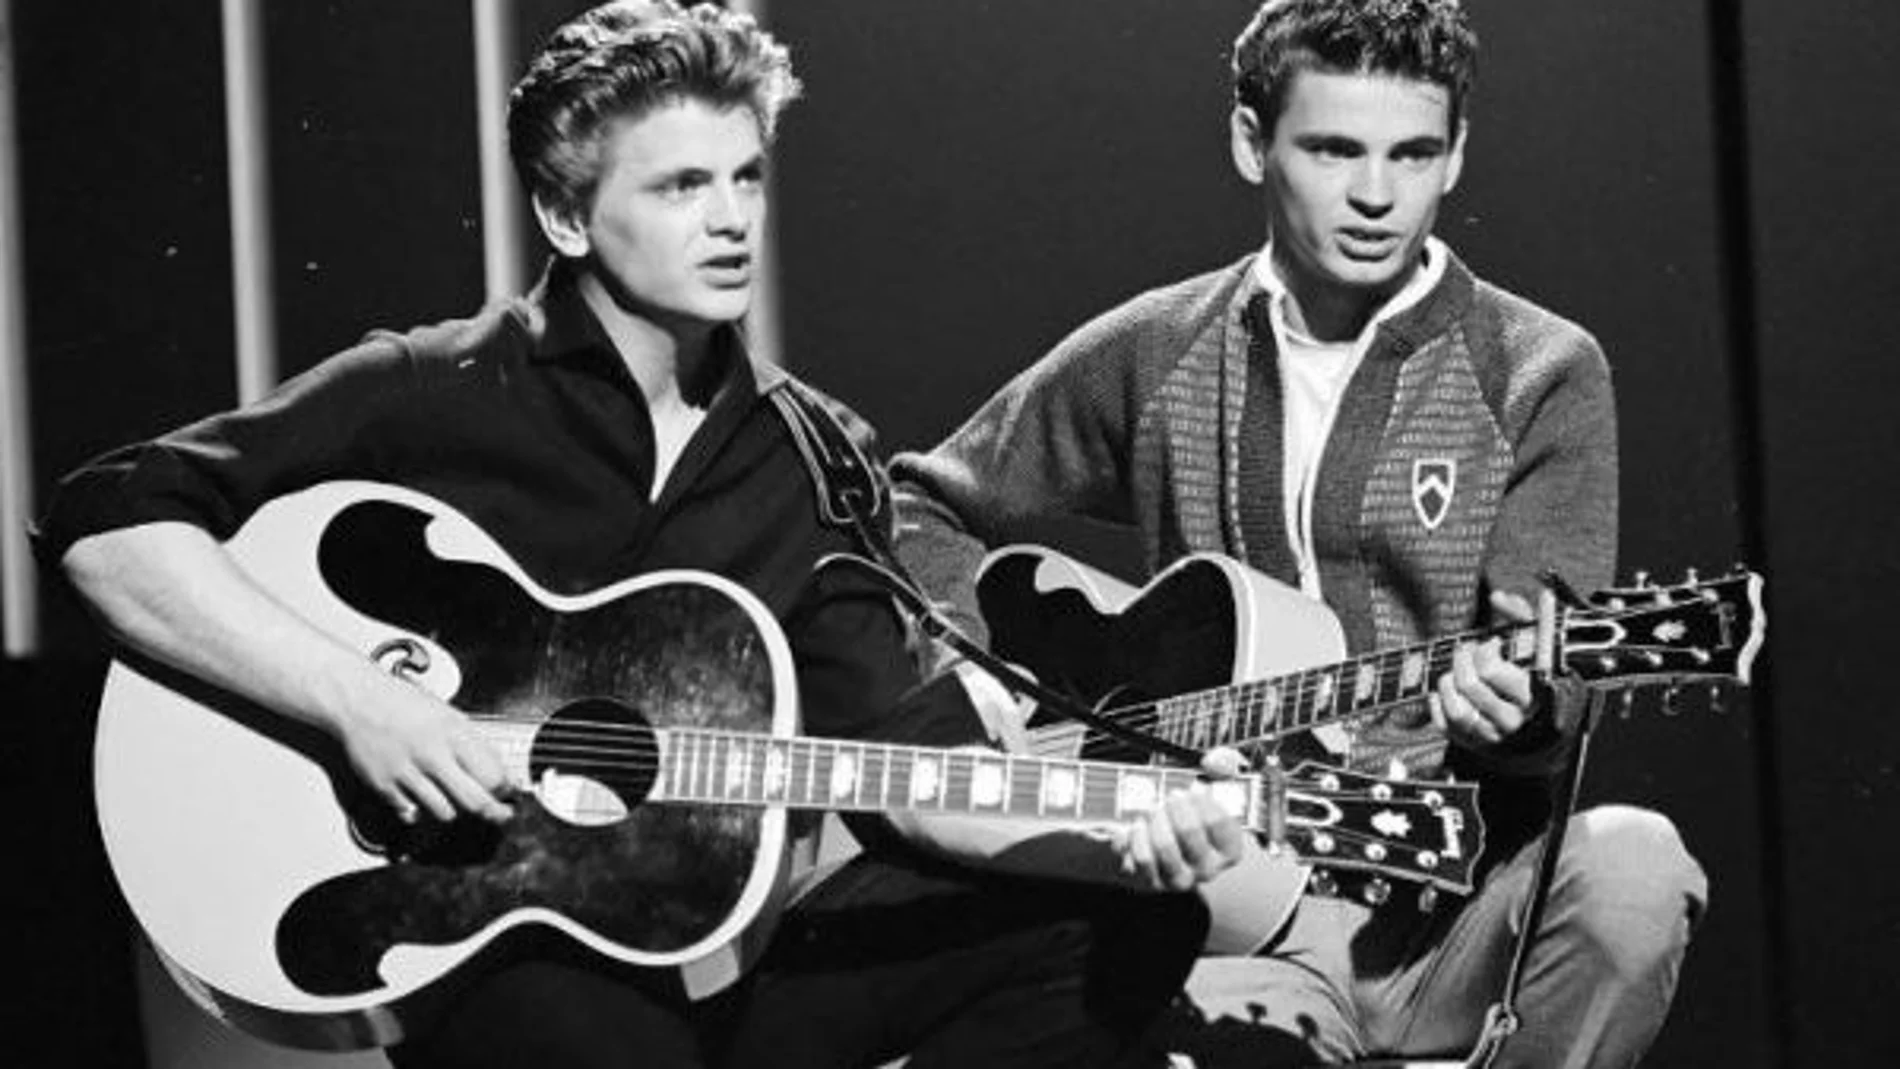 Phil y Don Everly, los Everly Brothers